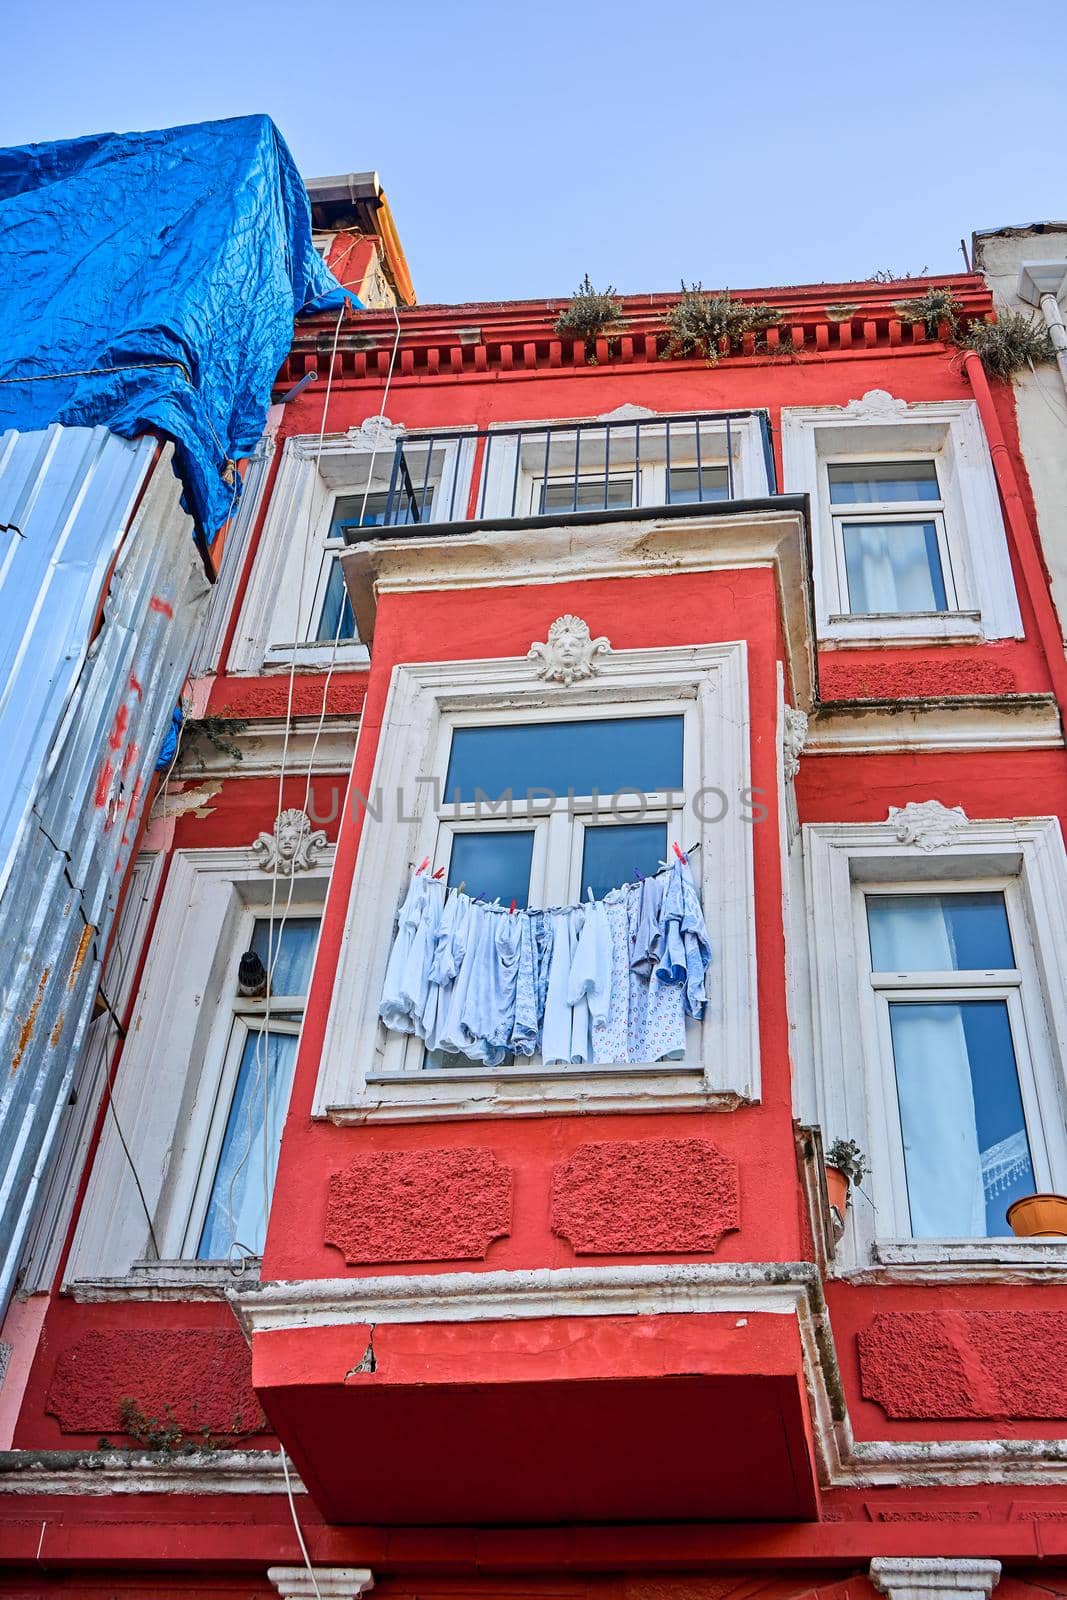 Usual life. The multicolored clothes dry on the rope. A picturesque old district in Istanbul. Low rise colorful houses and narrow cozy streets by Try_my_best